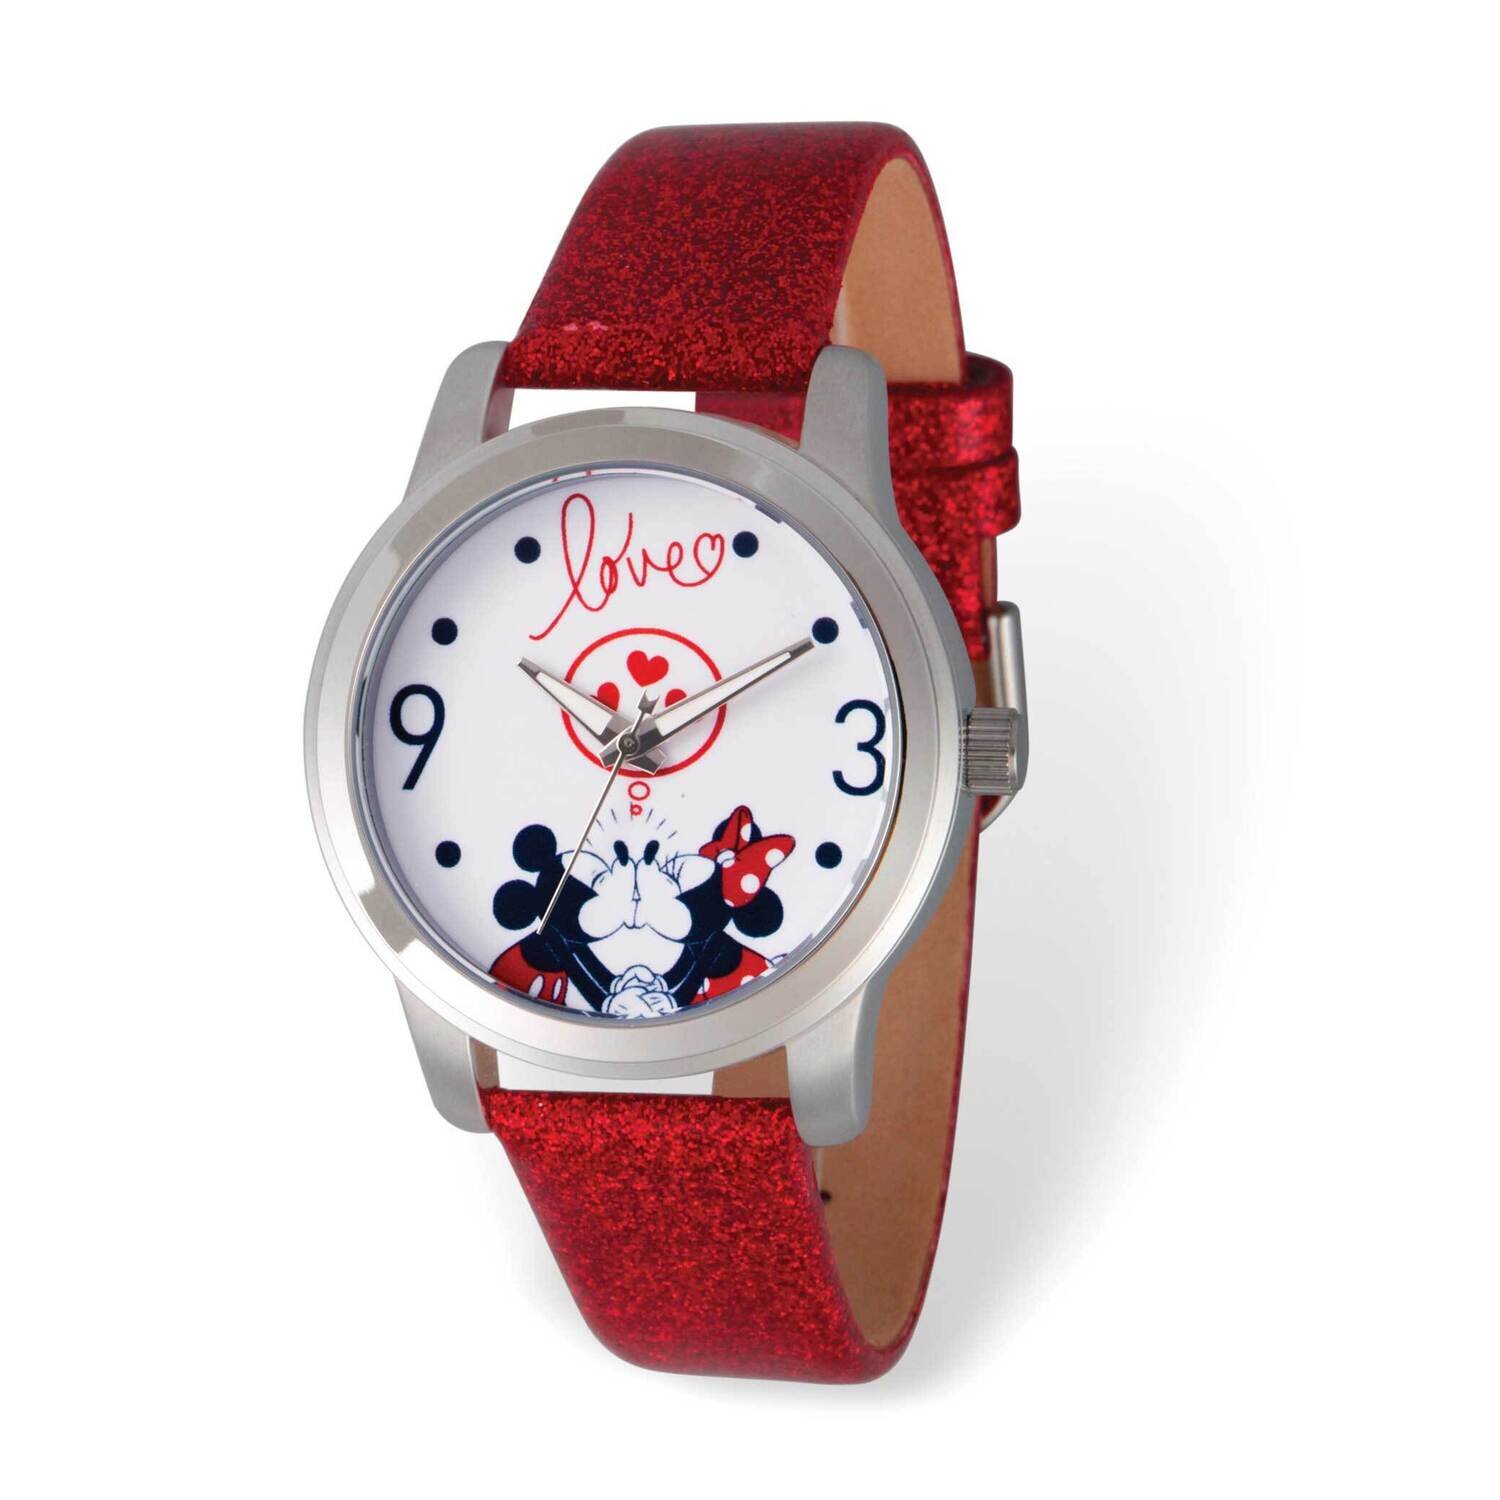 Disney Minnie/Mickey Mouse Love Red Leather Adult Watch XWA6181